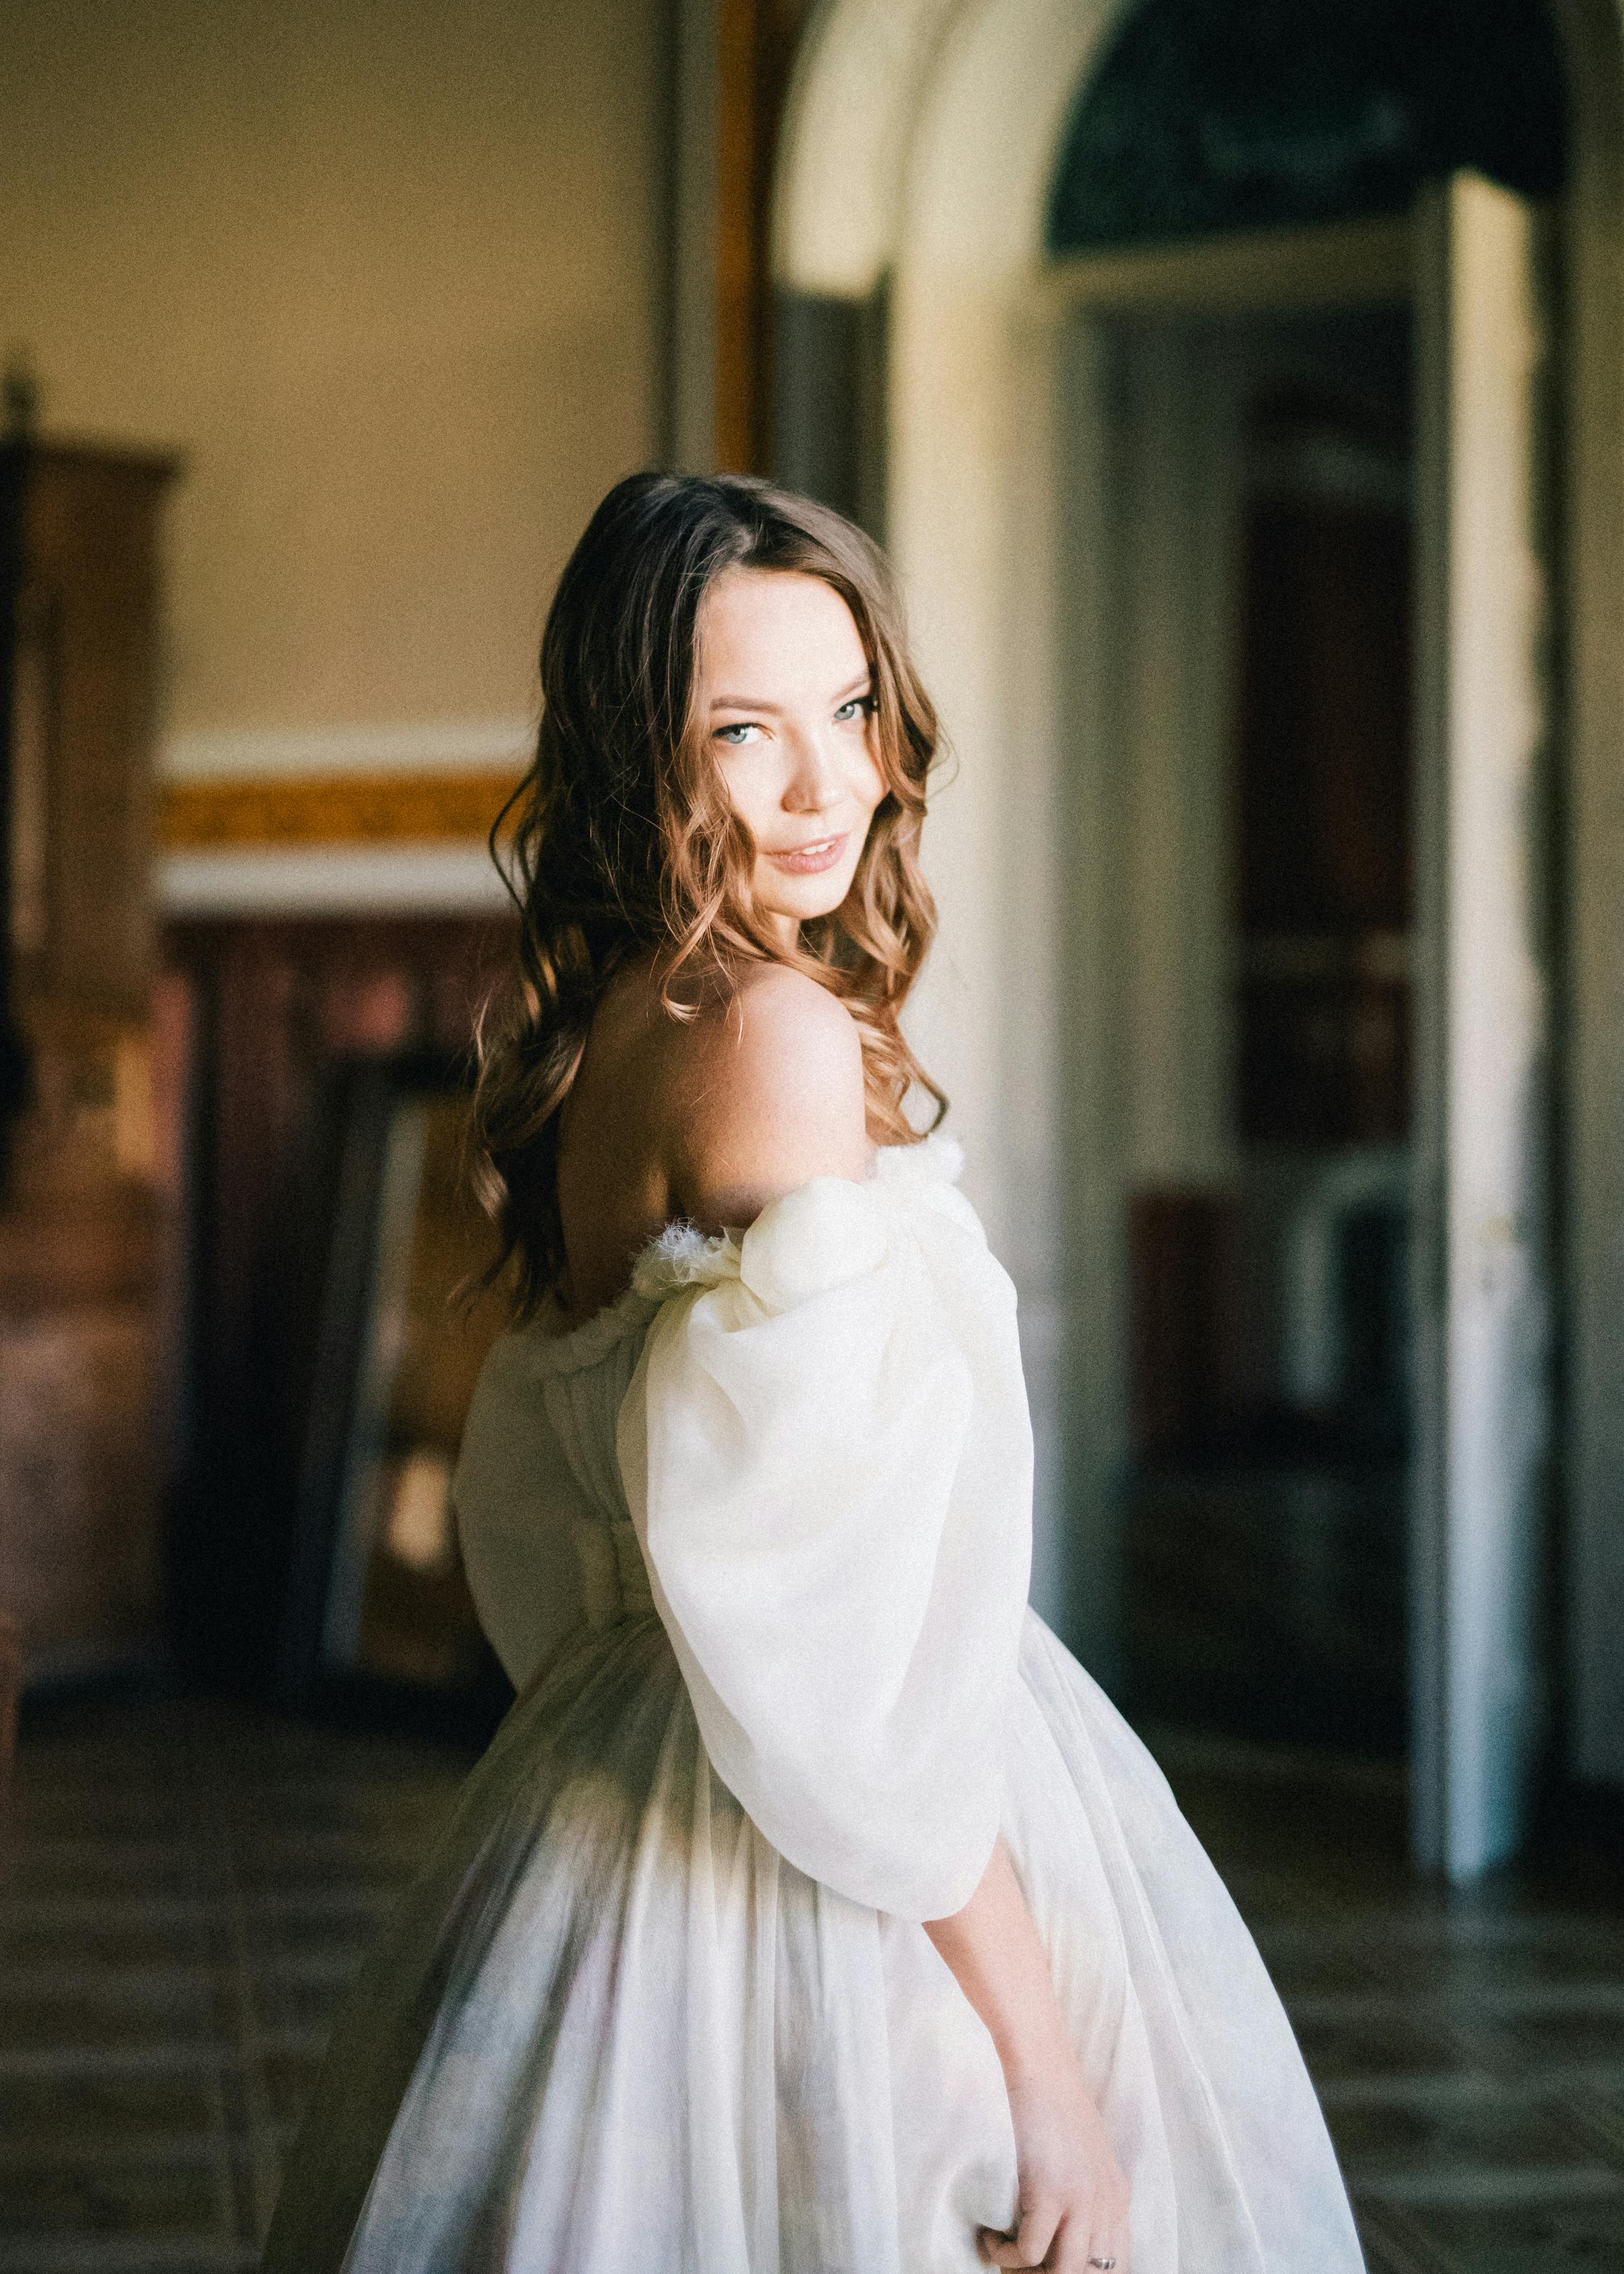 Free Images : person, people, white, cute, female, pattern, portrait,  model, young, spring, green, youth, natural, fresh, fashion, pink, healthy,  wedding dress, caucasian, face, eyes, happy, happiness, skin, joy, teen, beautiful  women,